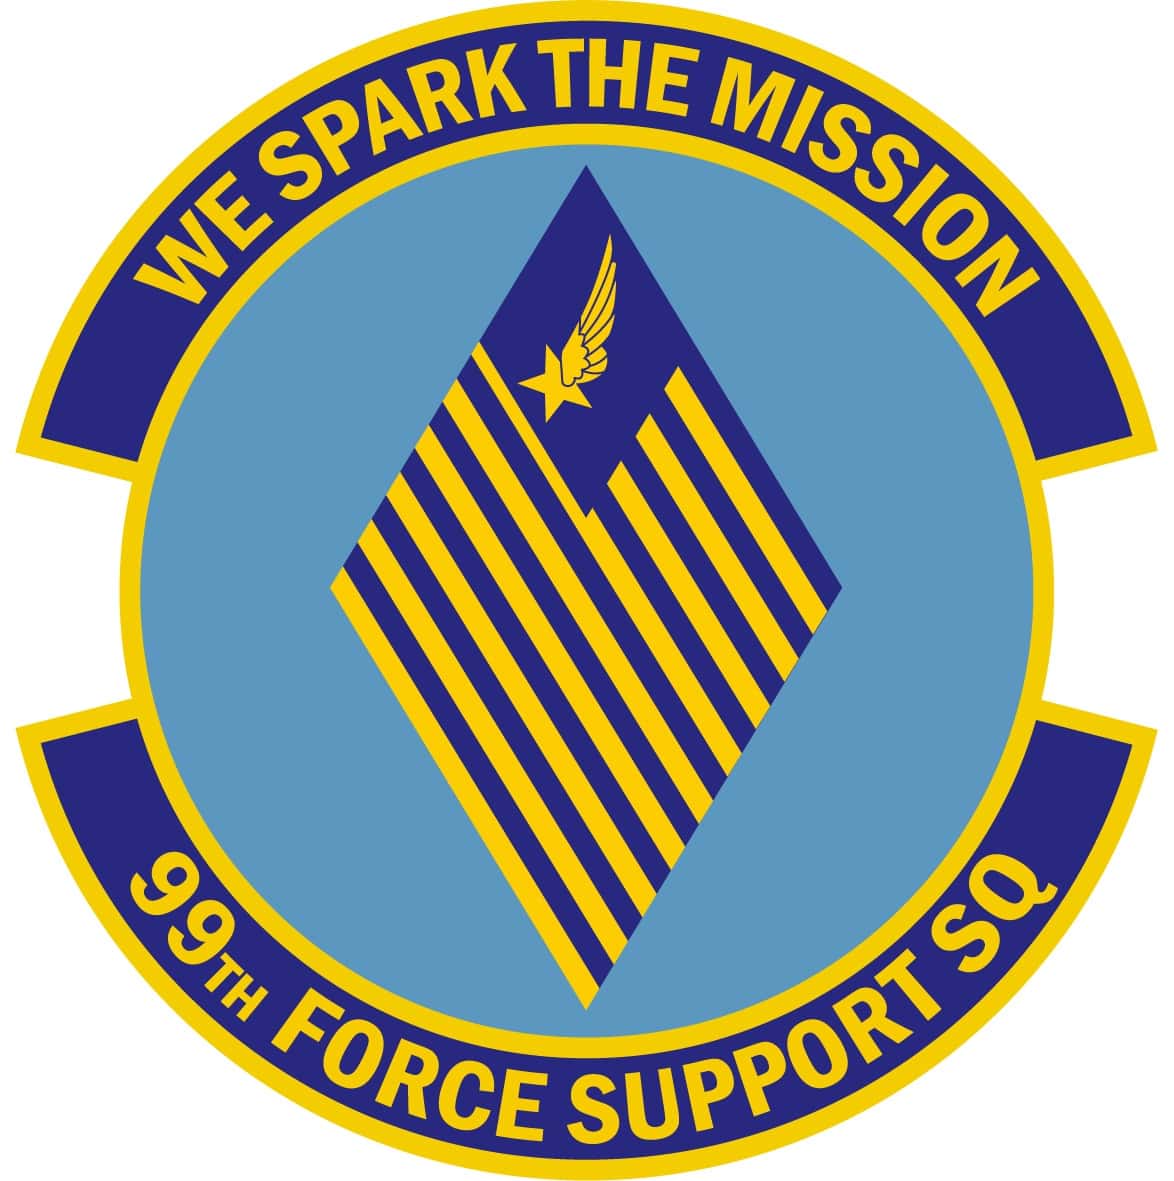 99th Force Support Squadron insignia